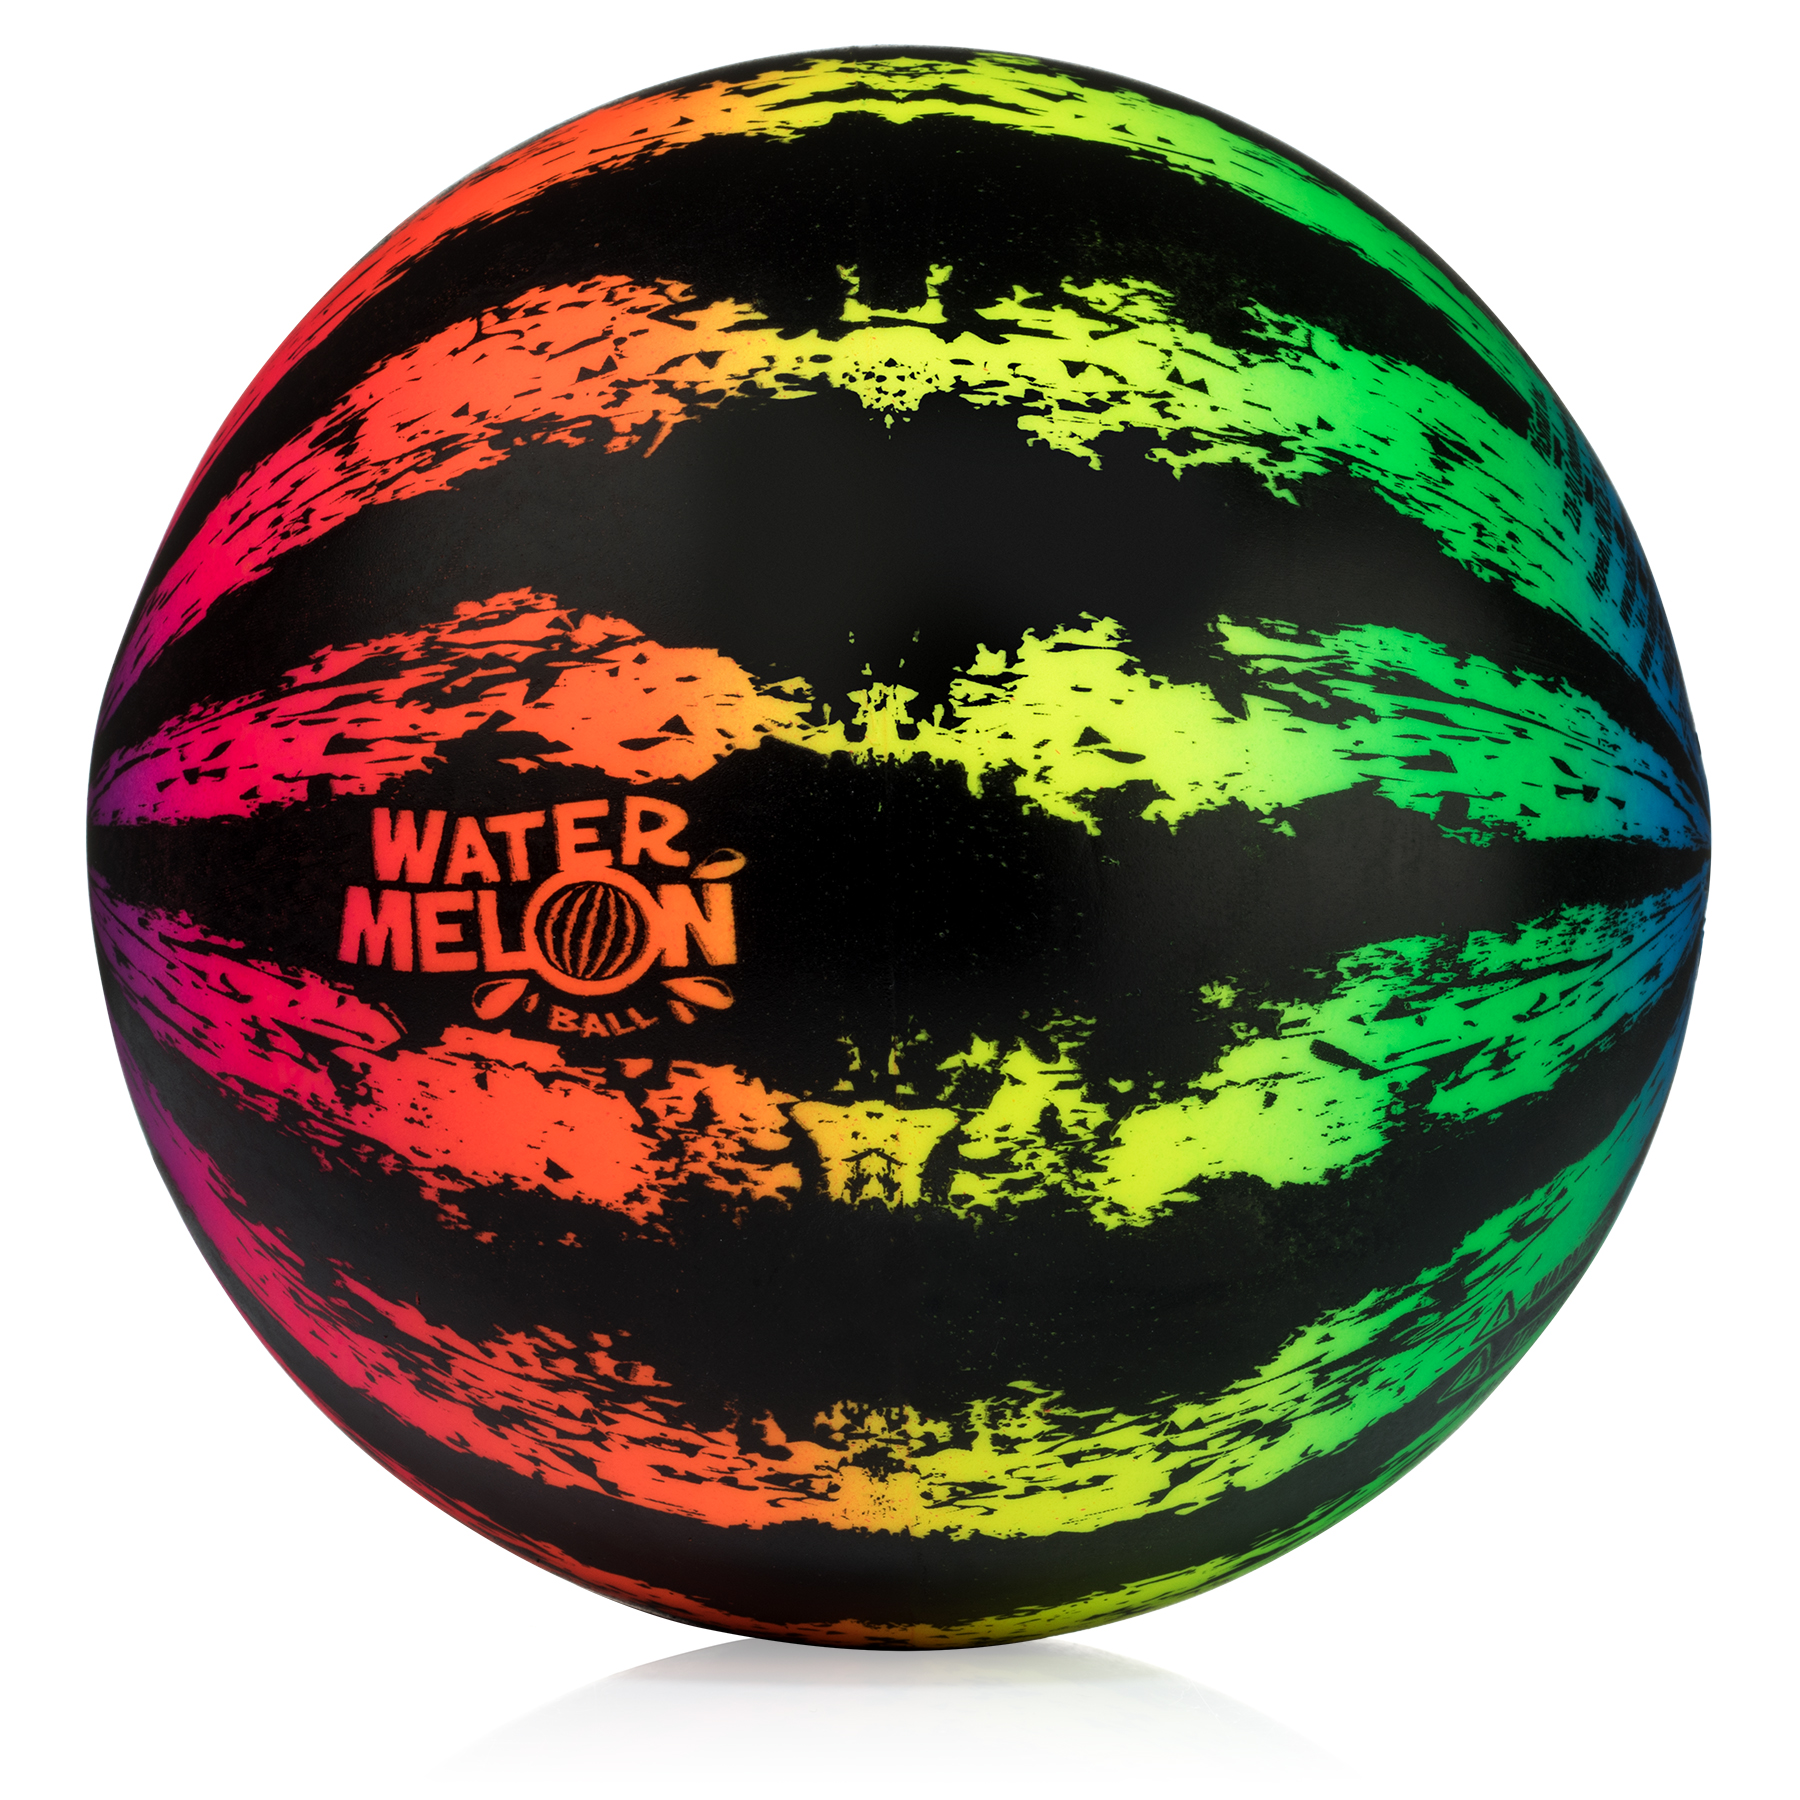 Watermelon Ball JR is smaller, lighter, and brighter